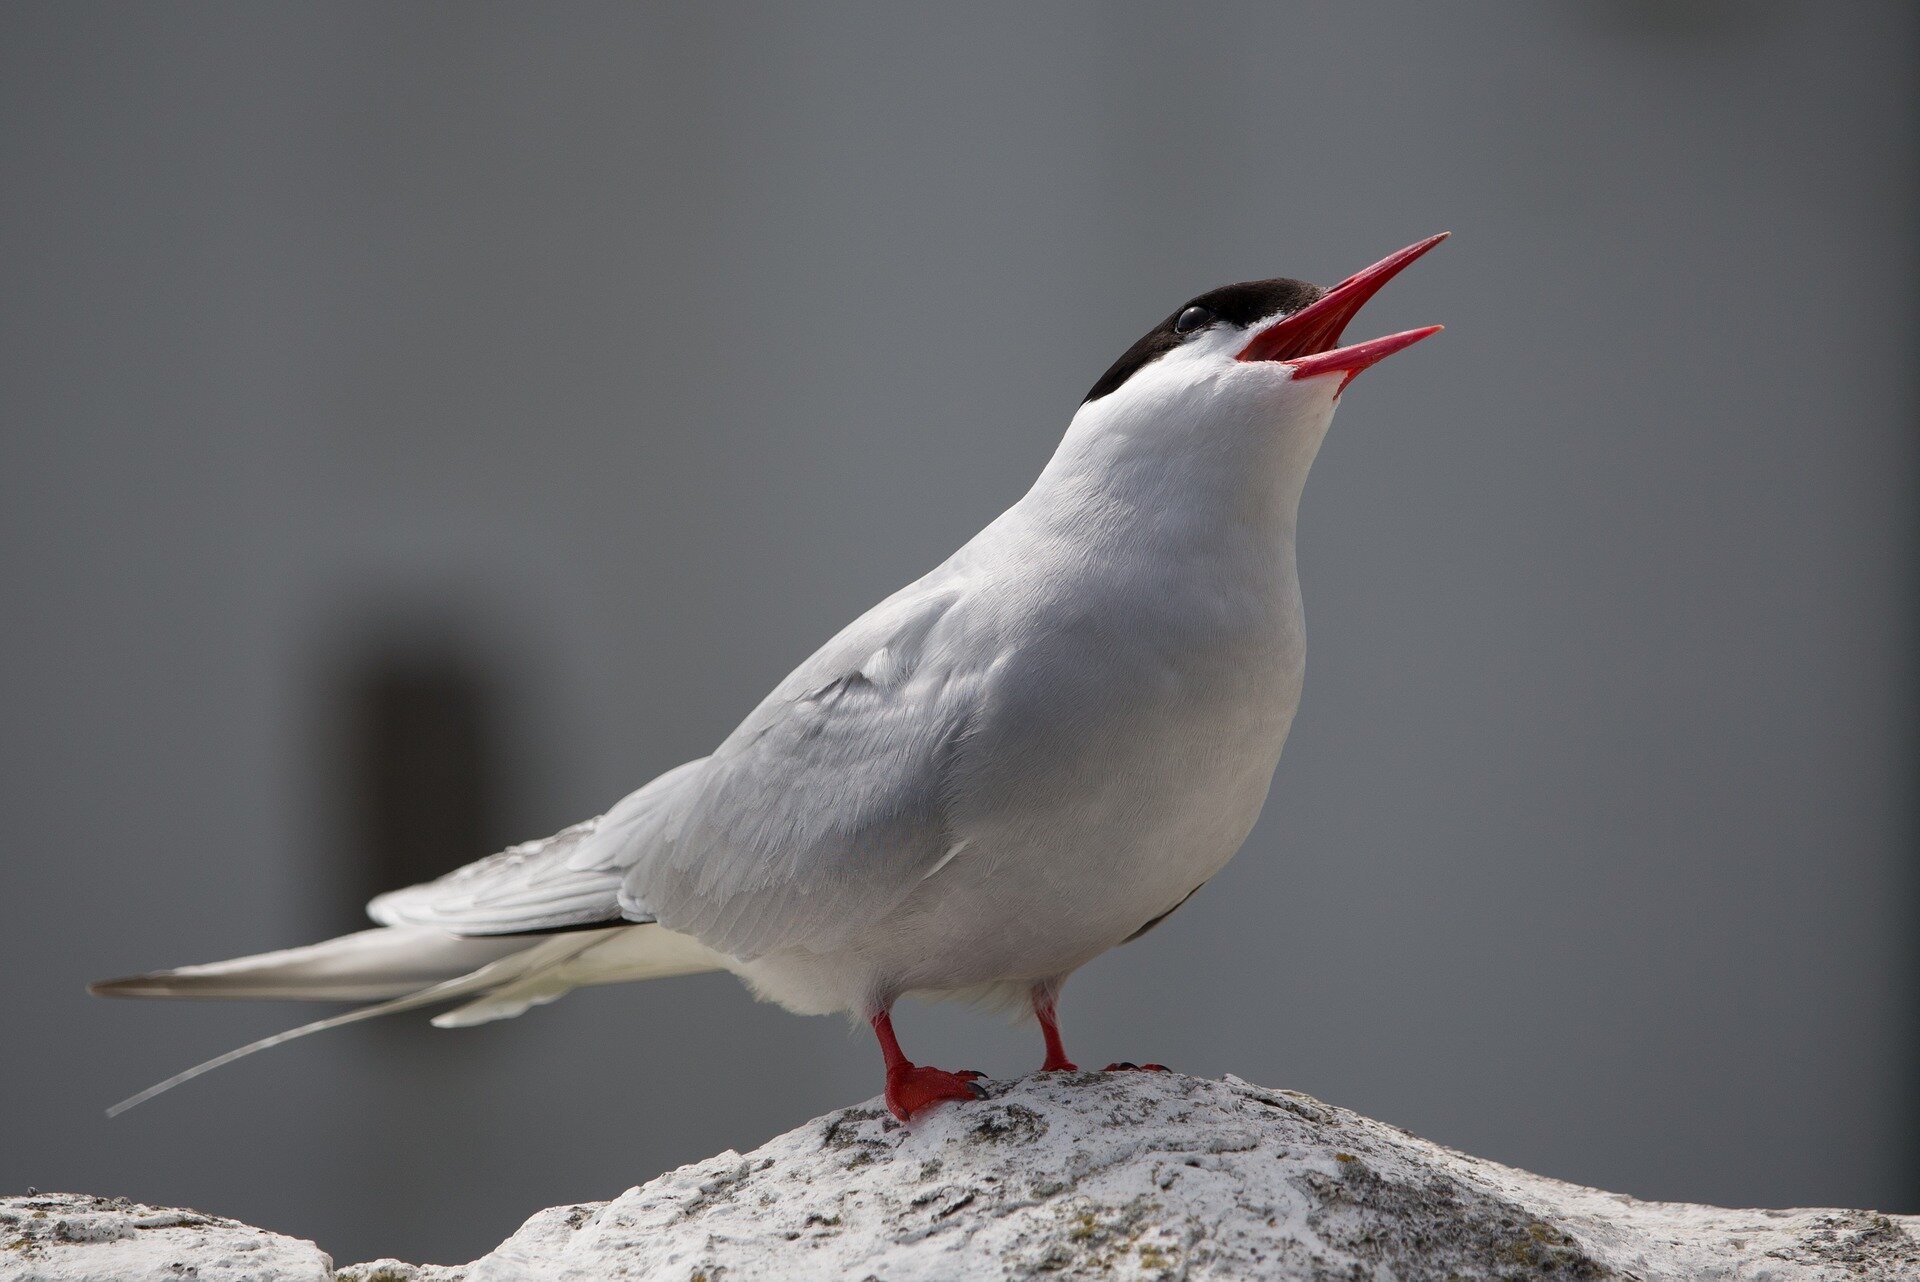 First evidence of the impact of climate change on Arctic Terns - Phys.org